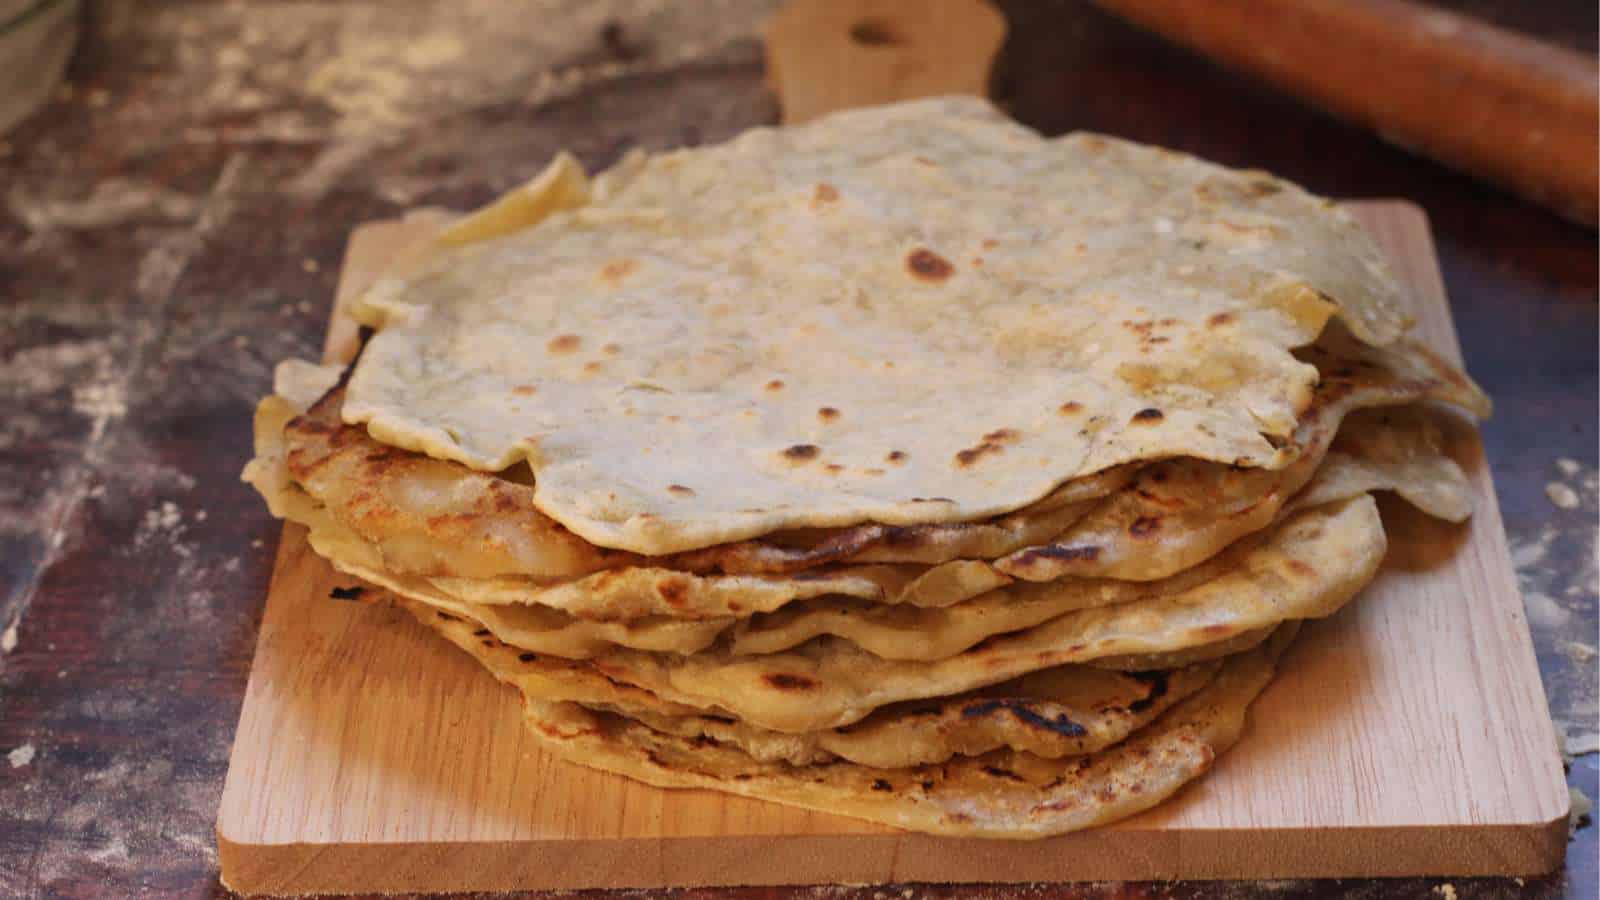 A stack of sourdough discard tortillas on a wooden cutting board.